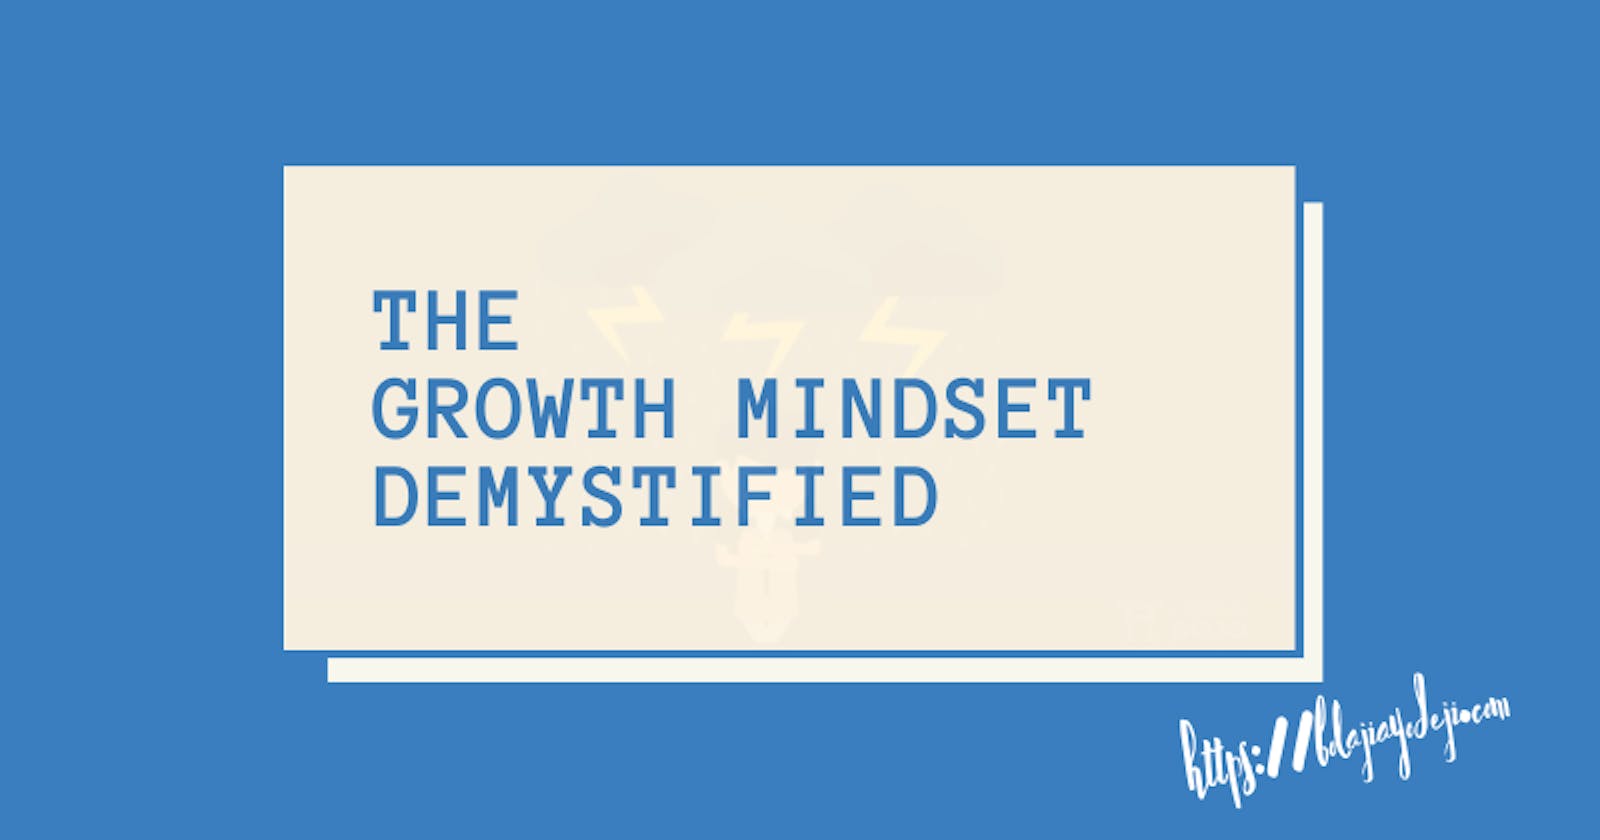 The GROWTH MINDSET Demystified